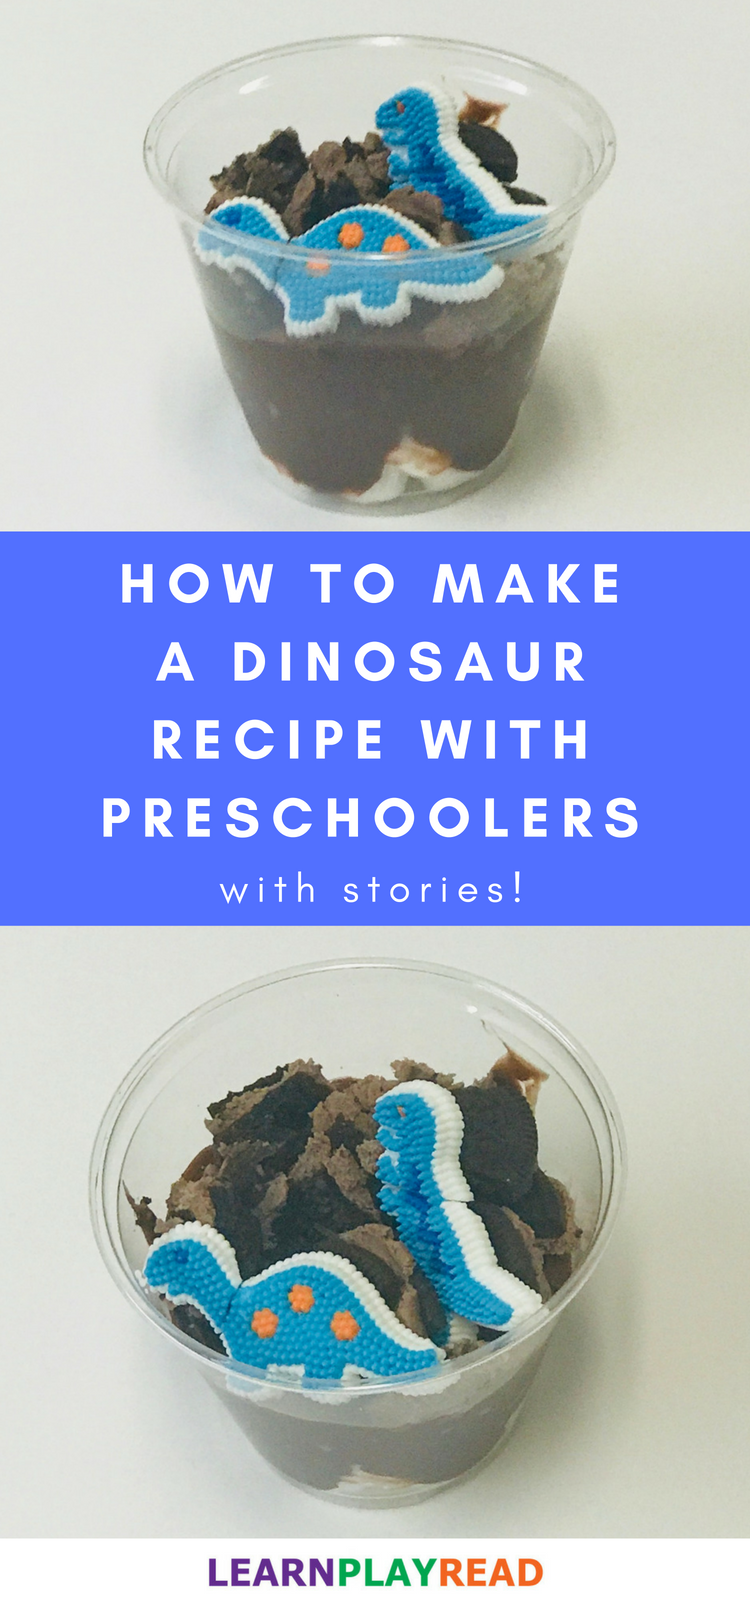 How to Make a Dinosaur Recipe with Preschoolers (With Stories)